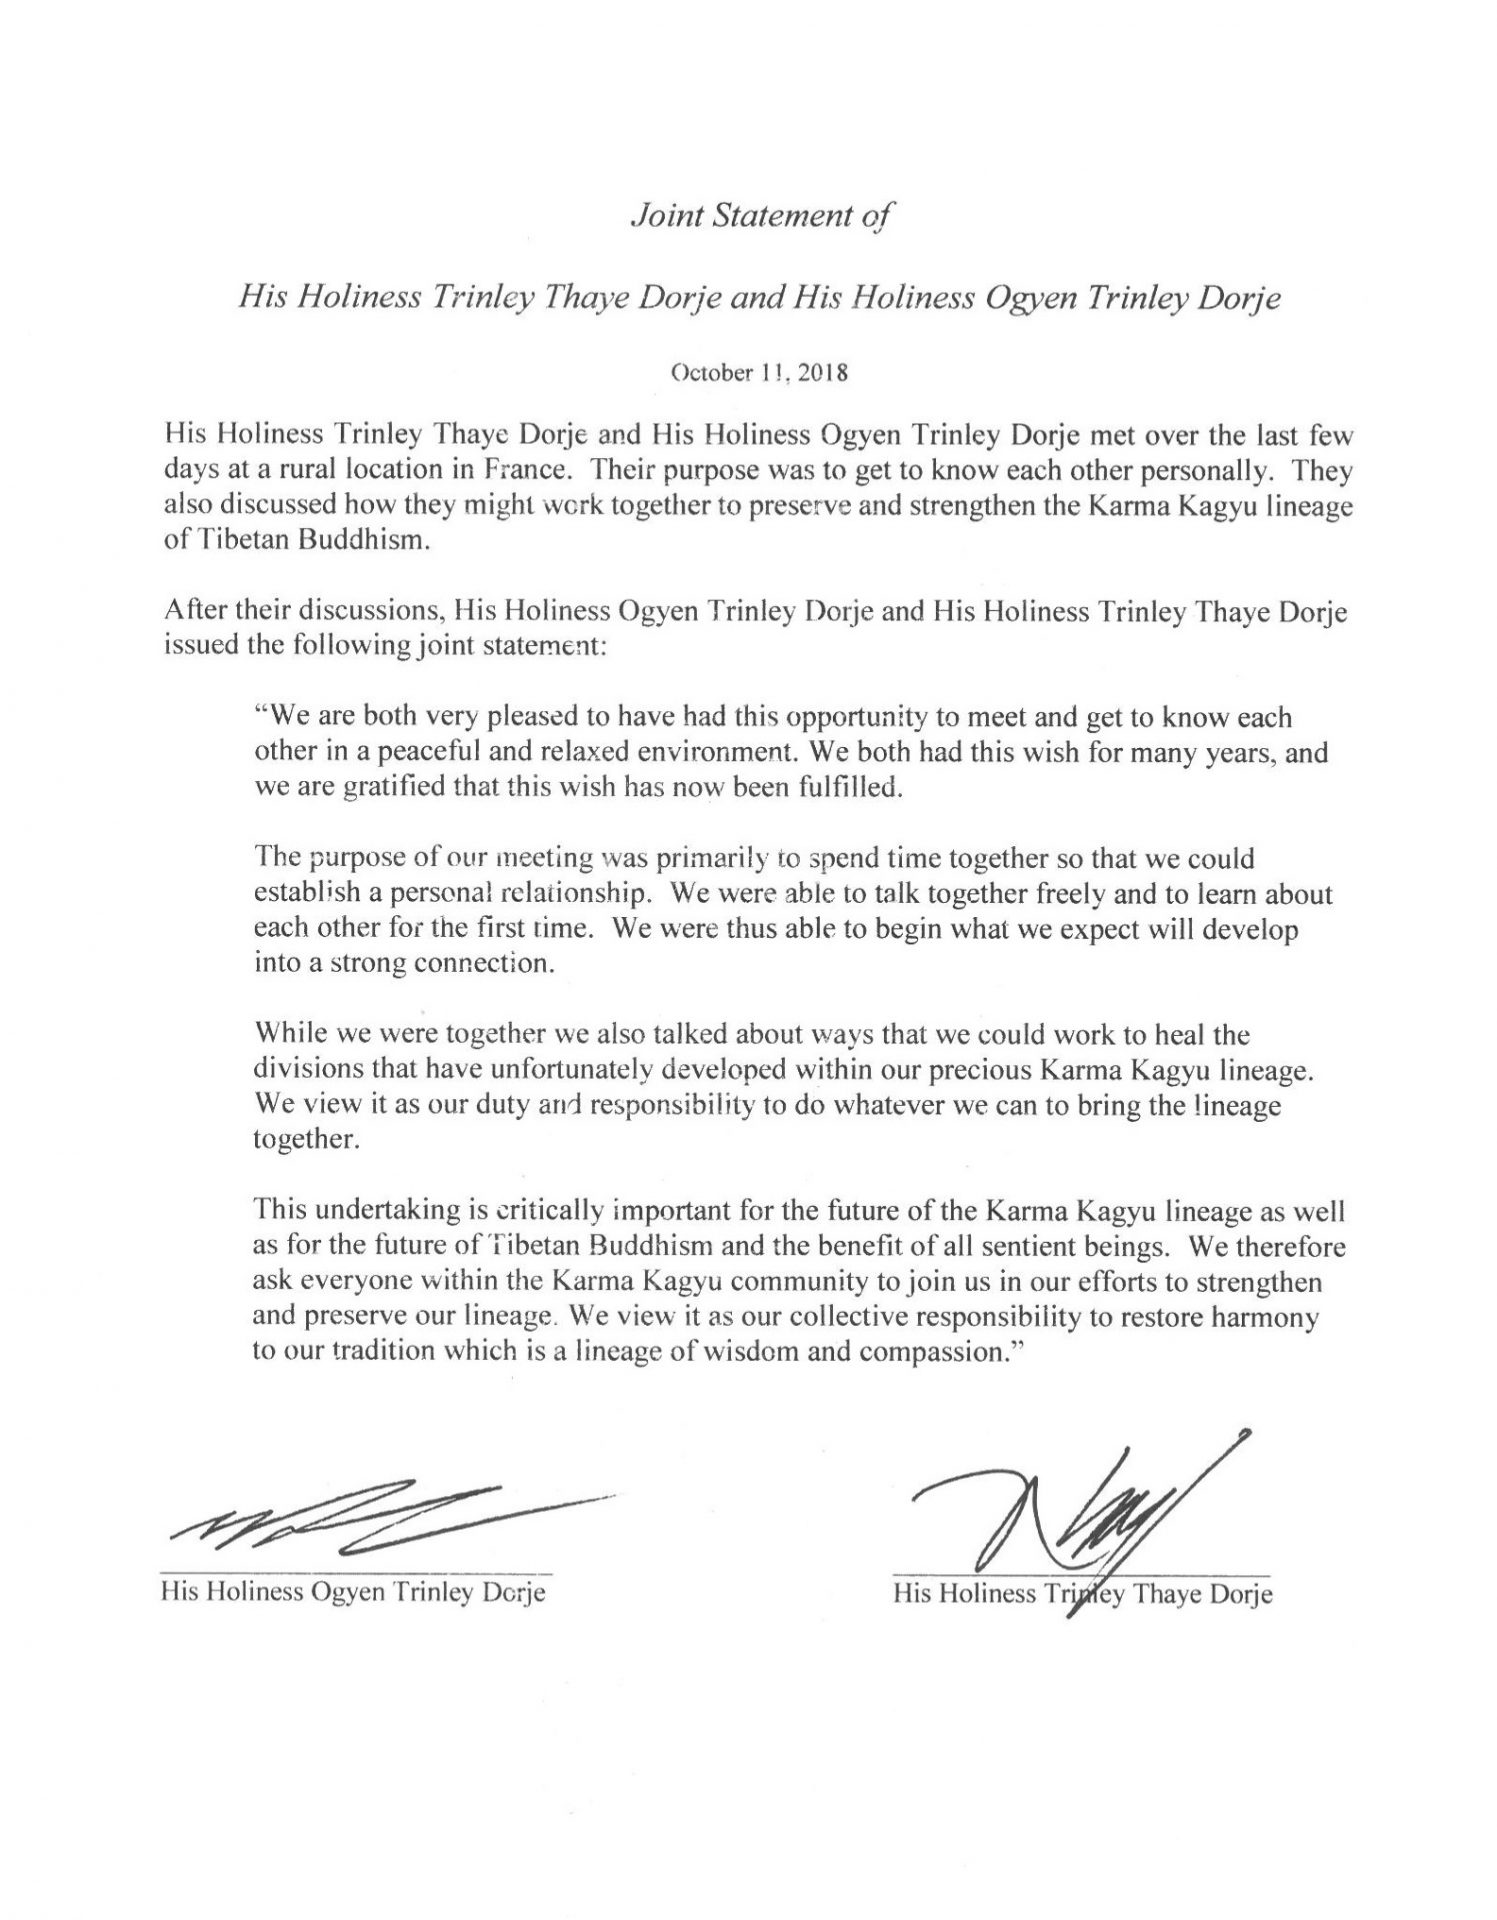 Joint statement of His Holiness Trinley Thaye Dorje and His Holiness Ogyen Trinley Dorje